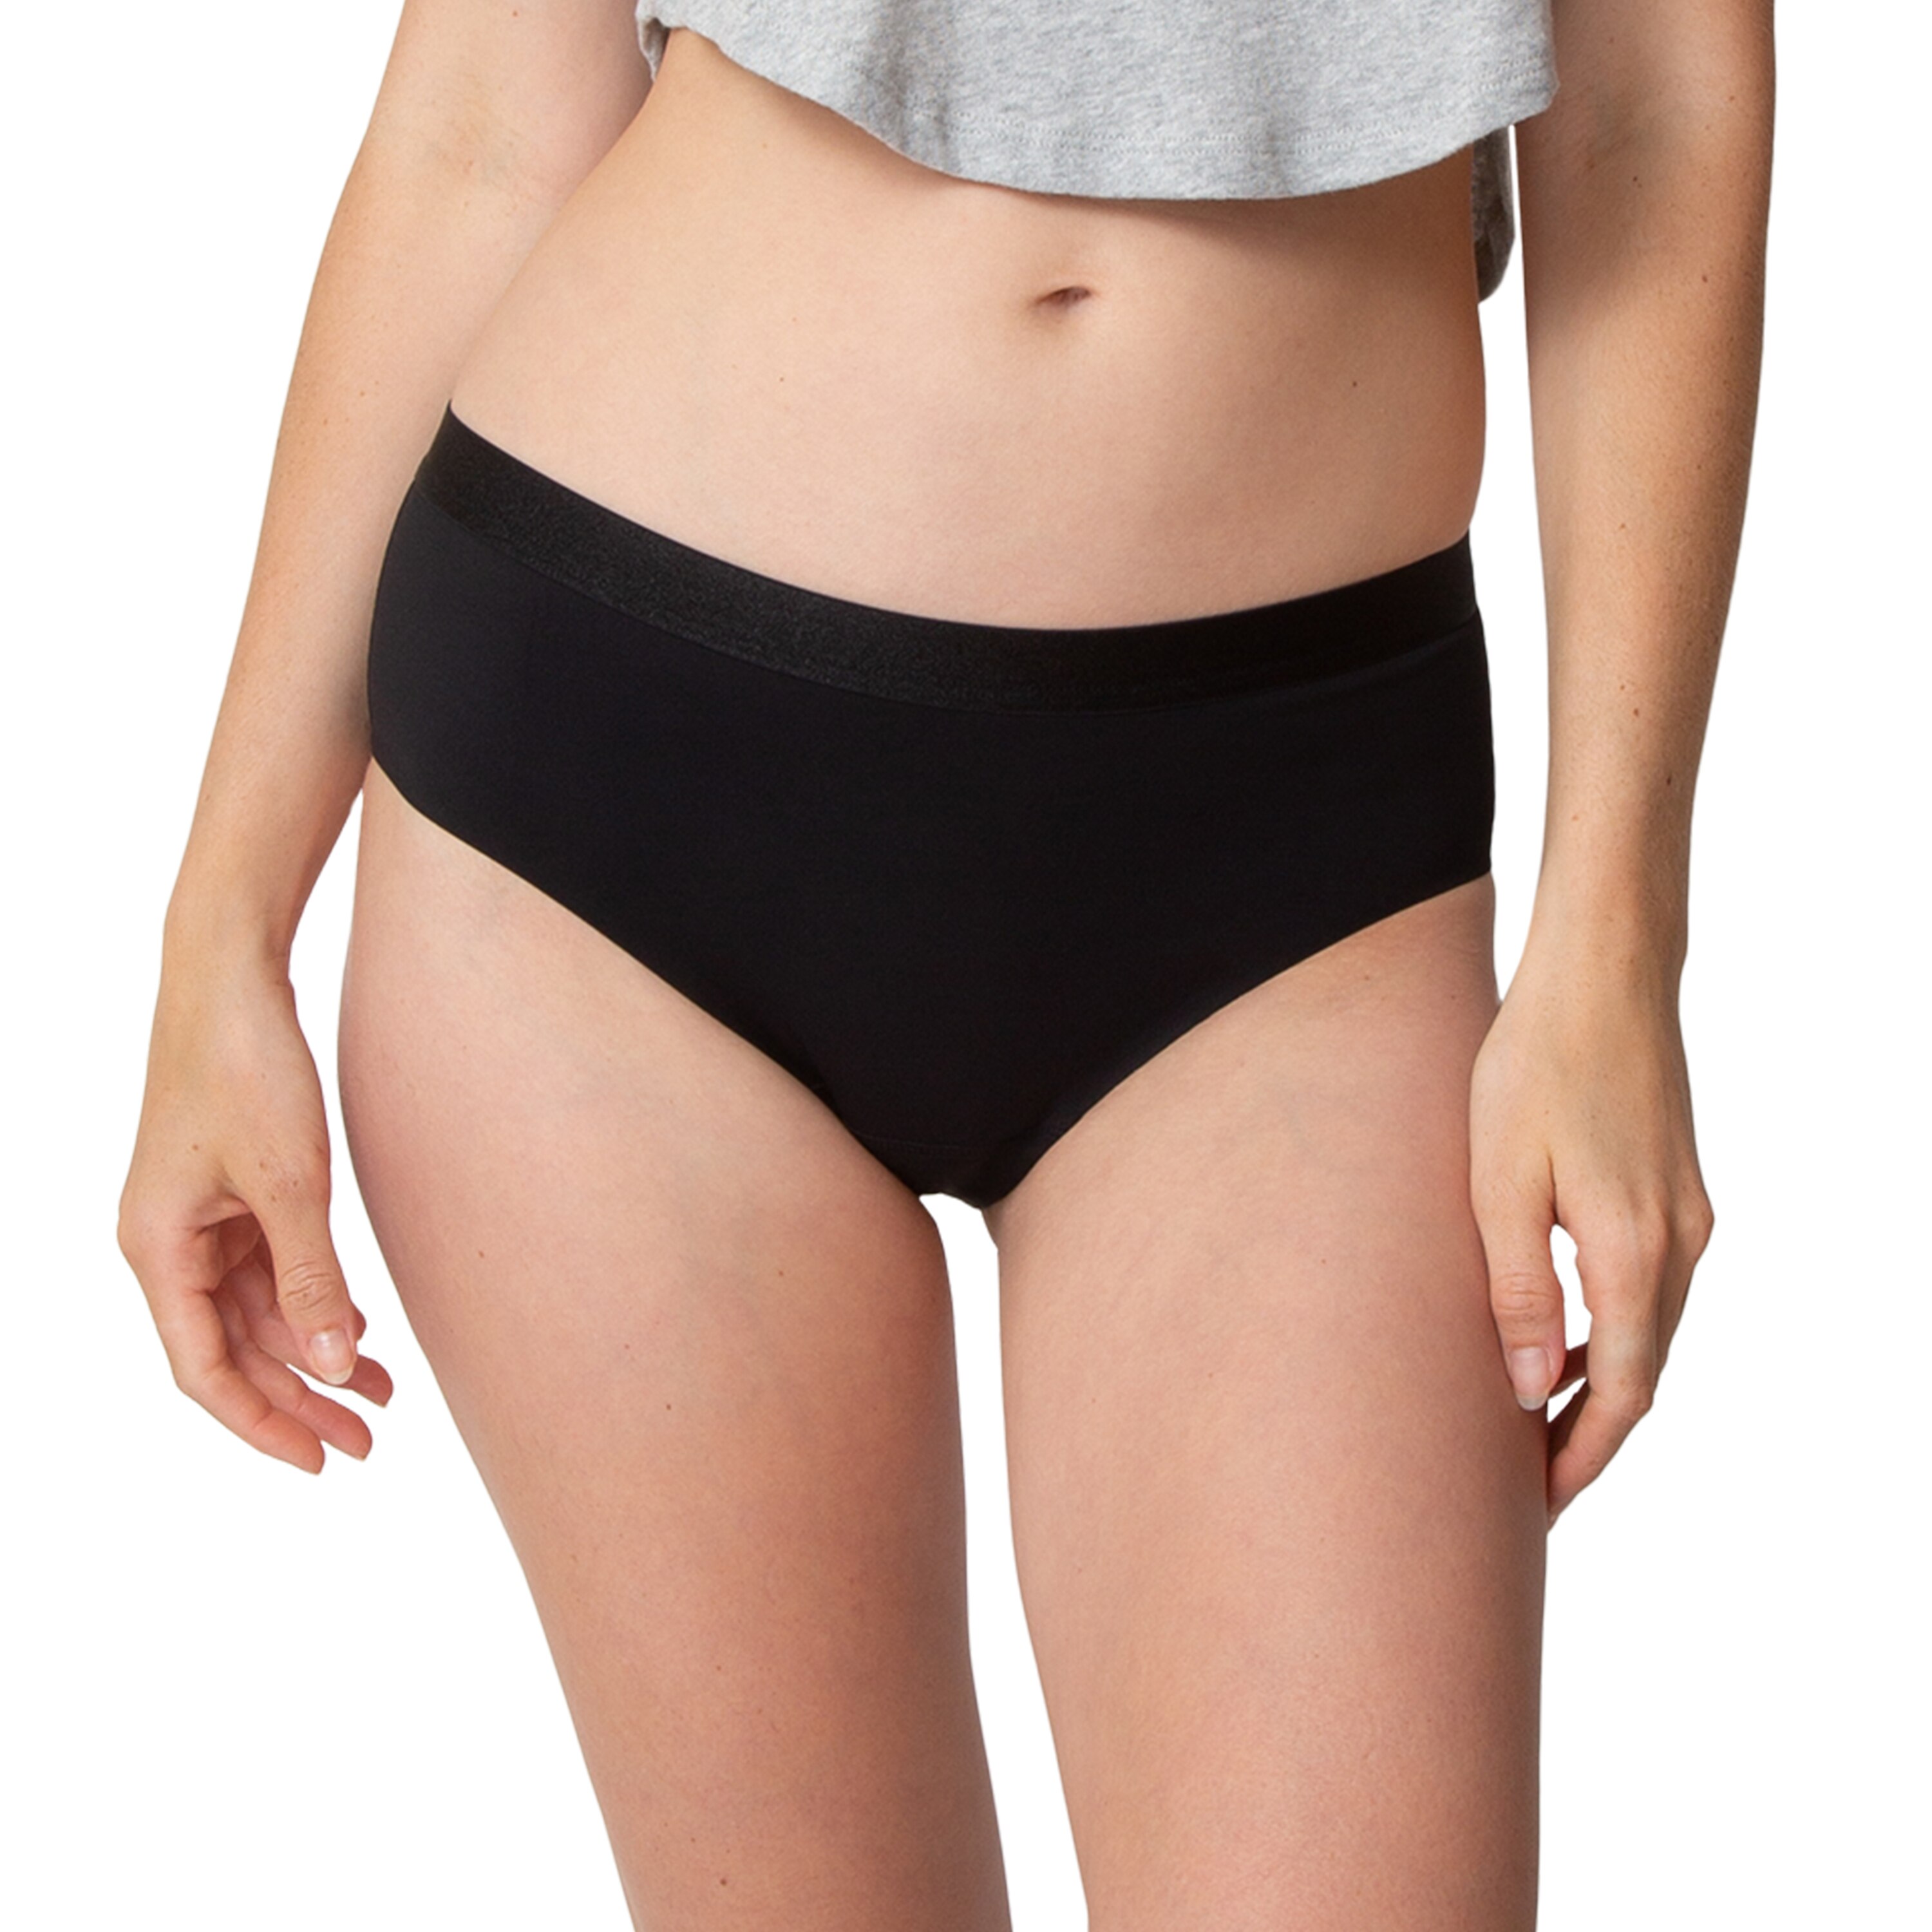 Thinx For All Women's Super Absorbency Cotton Brief Period Underwear, Size  Extra Small, Black - 1 ea